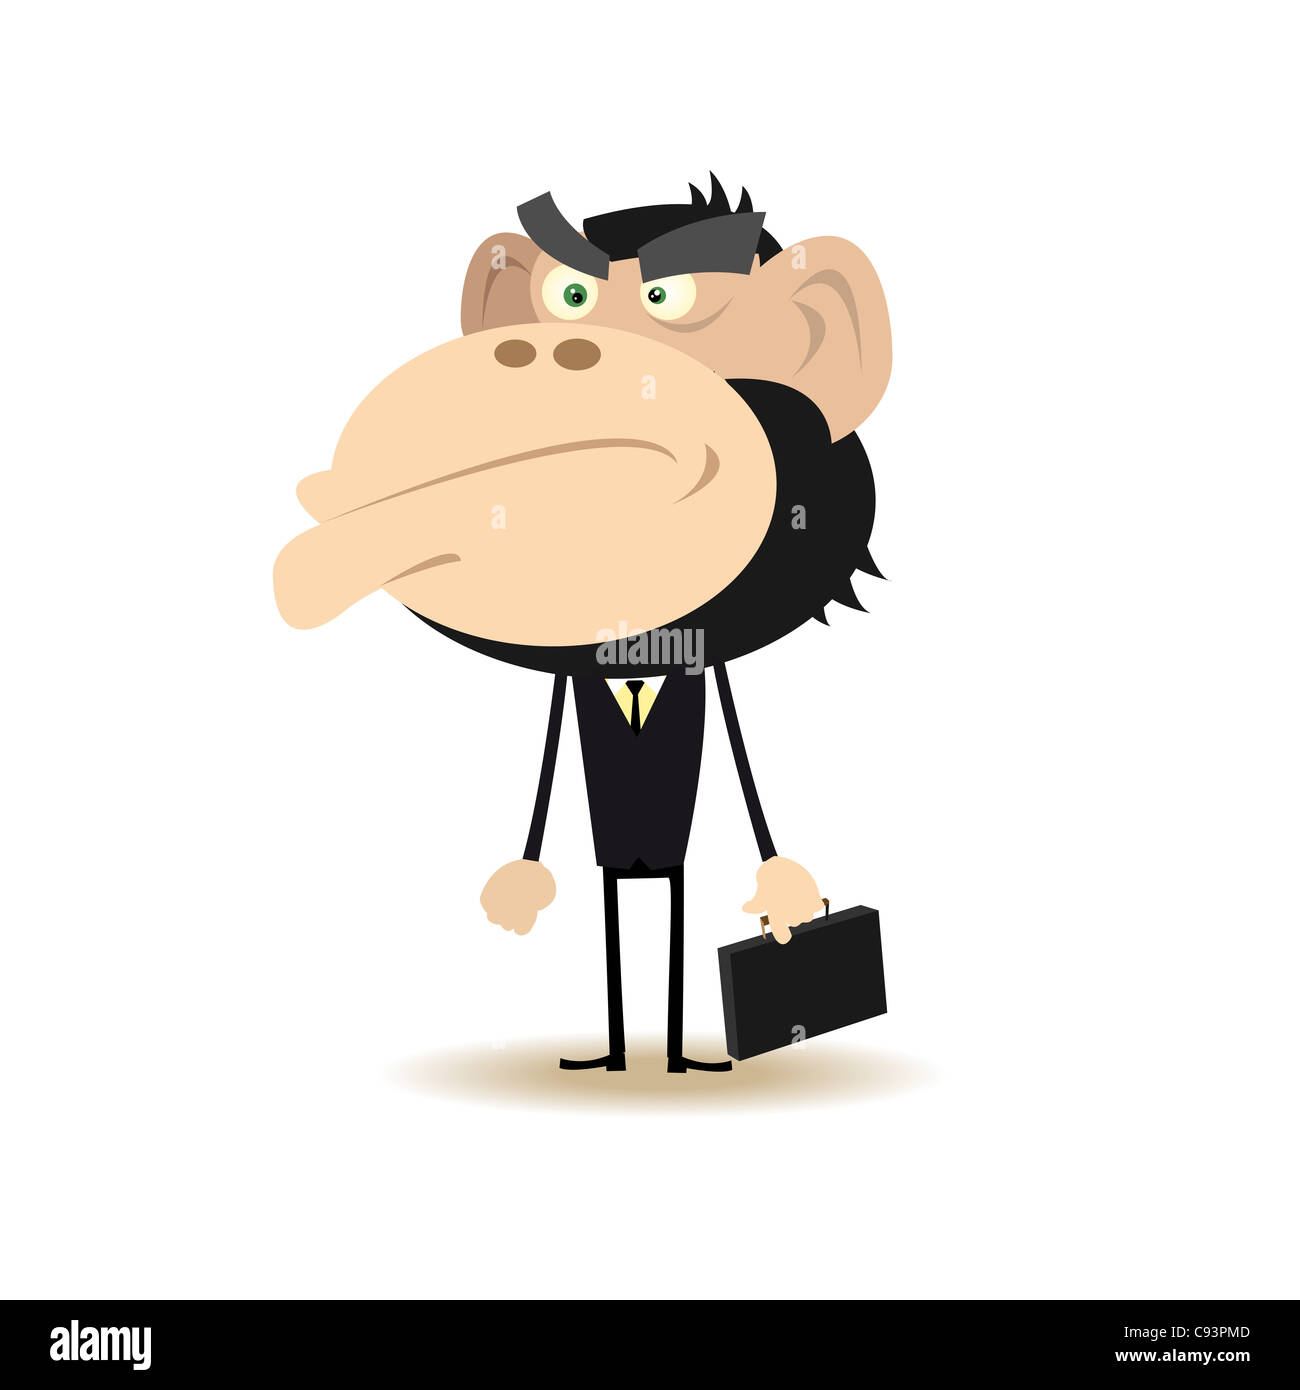 Illustration of a monkey businessman looking for money Stock Photo